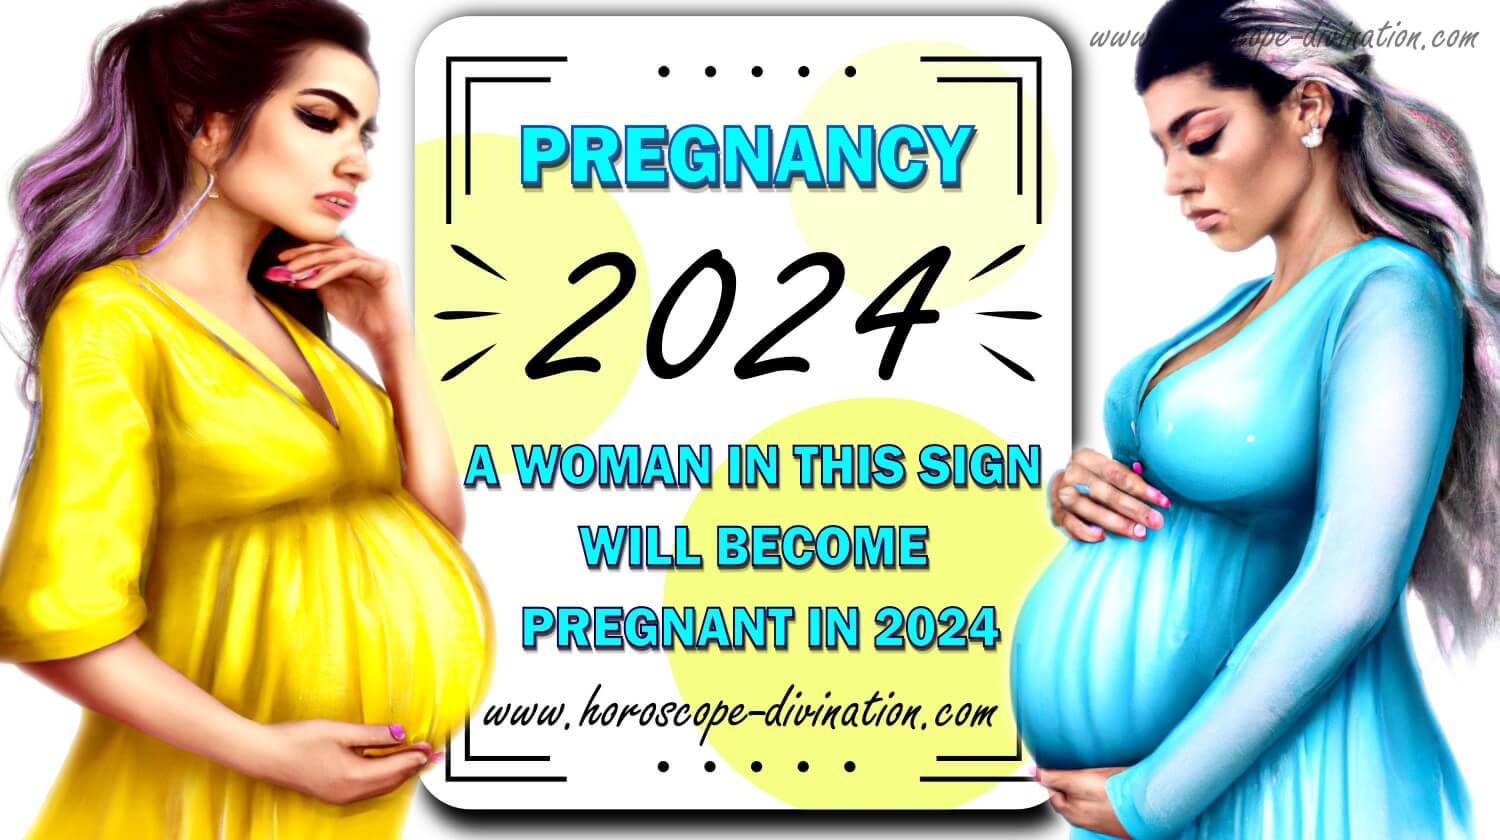 Horoscope 2024 This sign will pregnant in 2024!